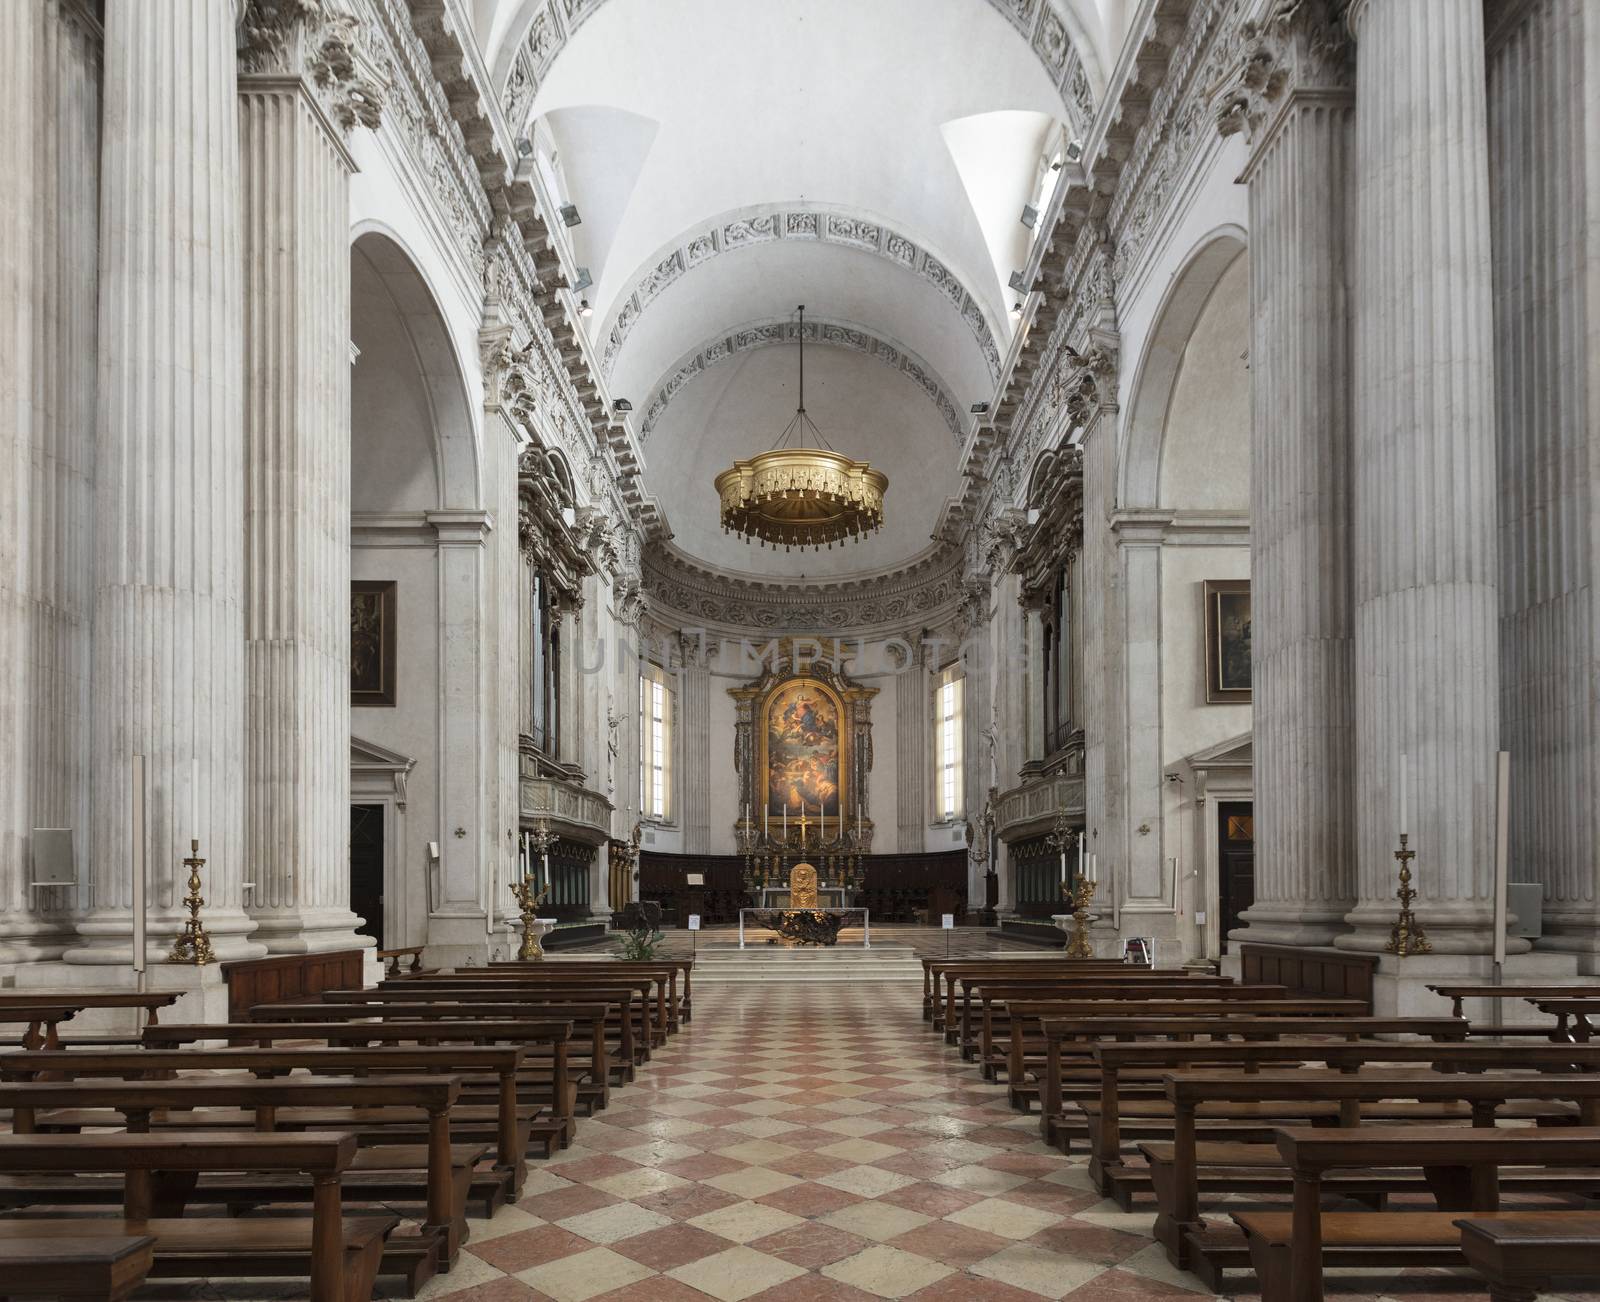 Brescia, Italy, Europe, August 2019, a view of the interior of the New Cathedral, the Duomo Nuovo